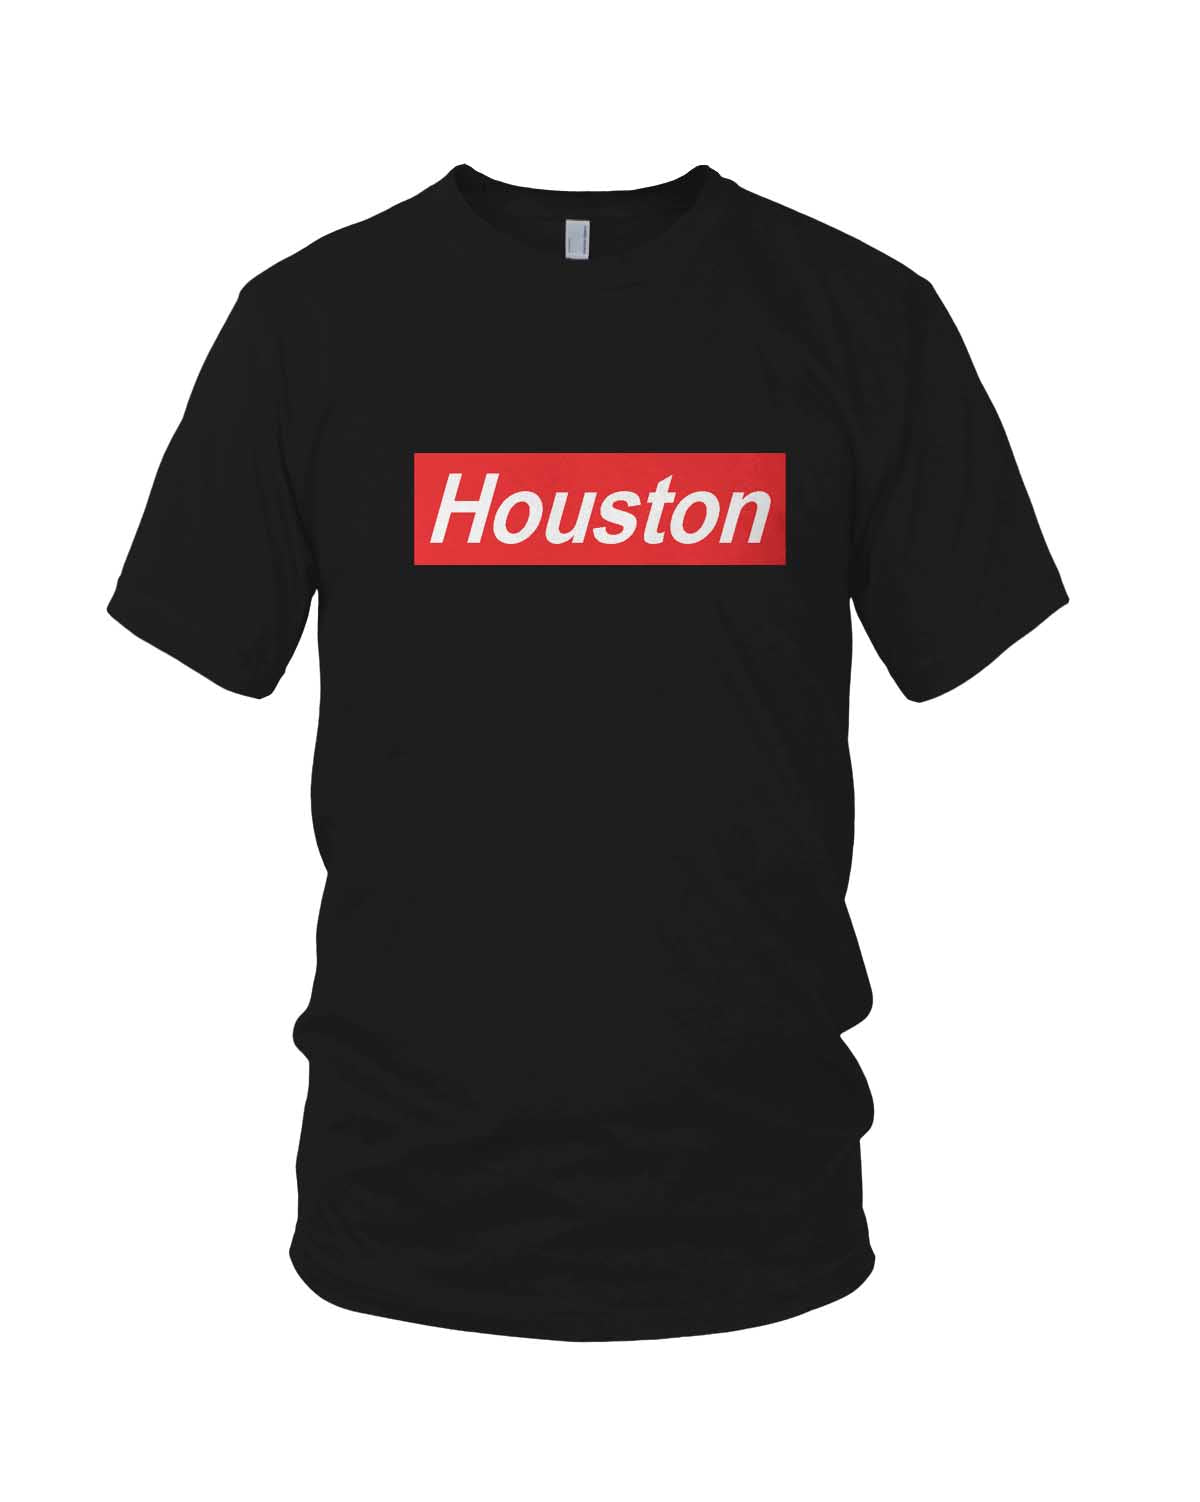 Houston Supreme themed shirt front view